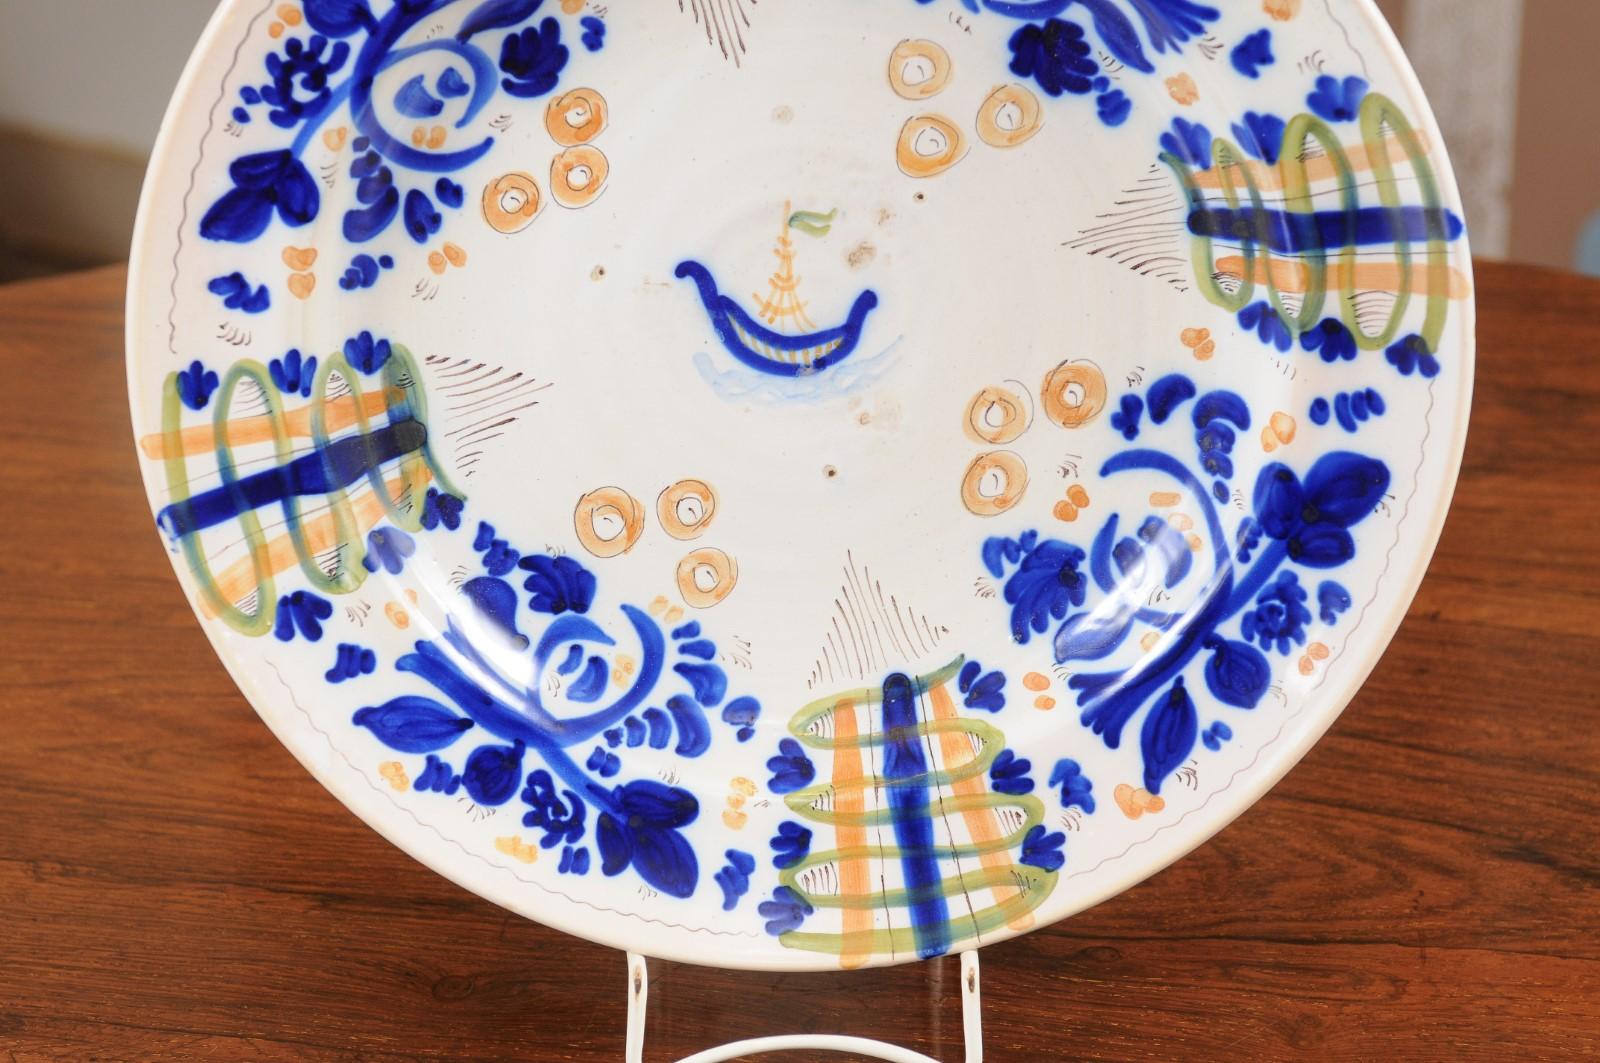 Polychrome Painted Faience Charger In Good Condition For Sale In Atlanta, GA